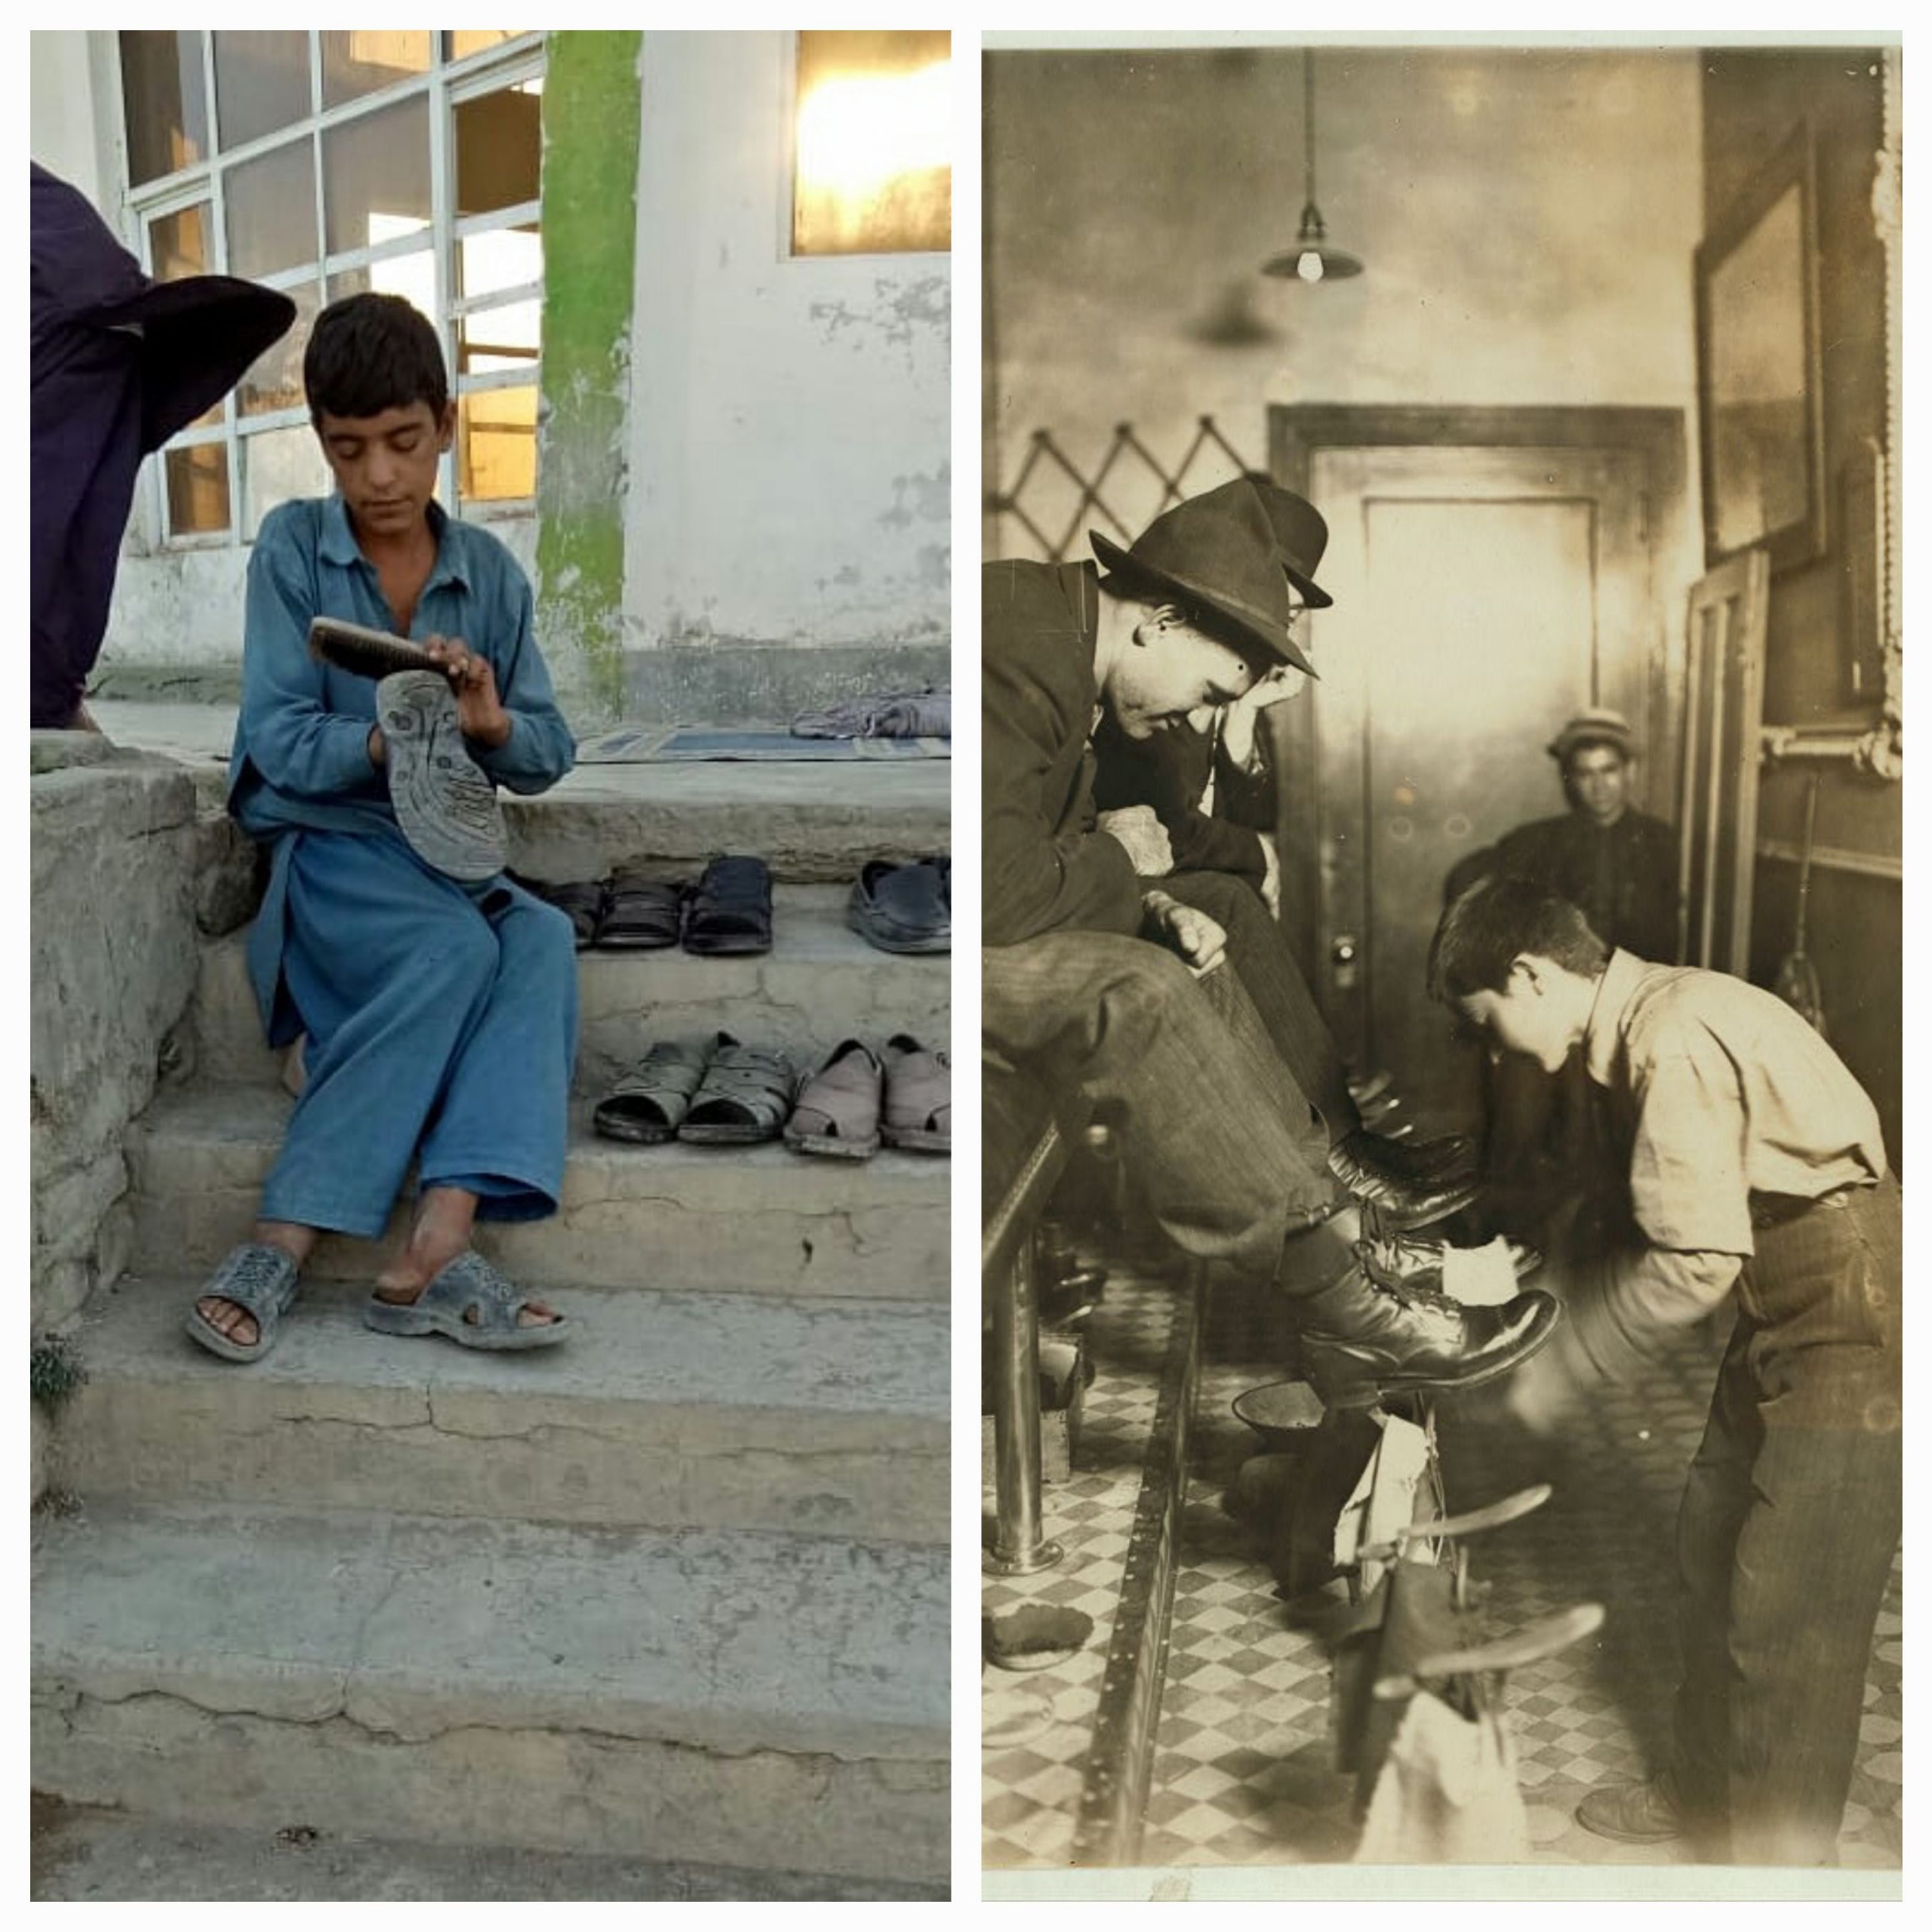 (from left) Detail: “Shoe shine boy in front of mosque, Quetta, Pakistan” by Habbat Shah and Detail: “Shoe shine parlor, NYC” by Lewis Wickes Hine